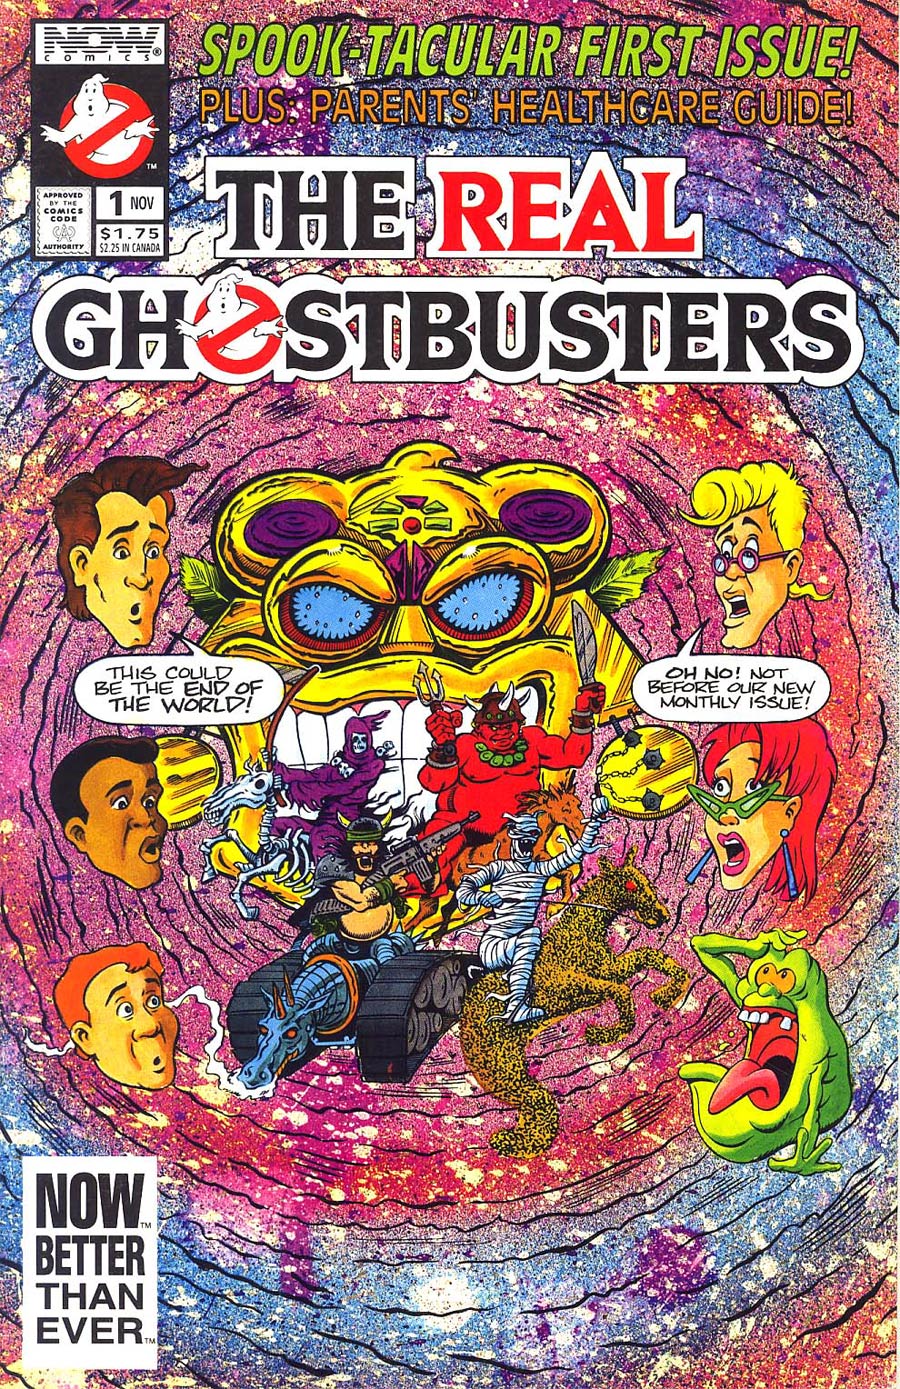 Real Ghostbusters Vol 2 #1